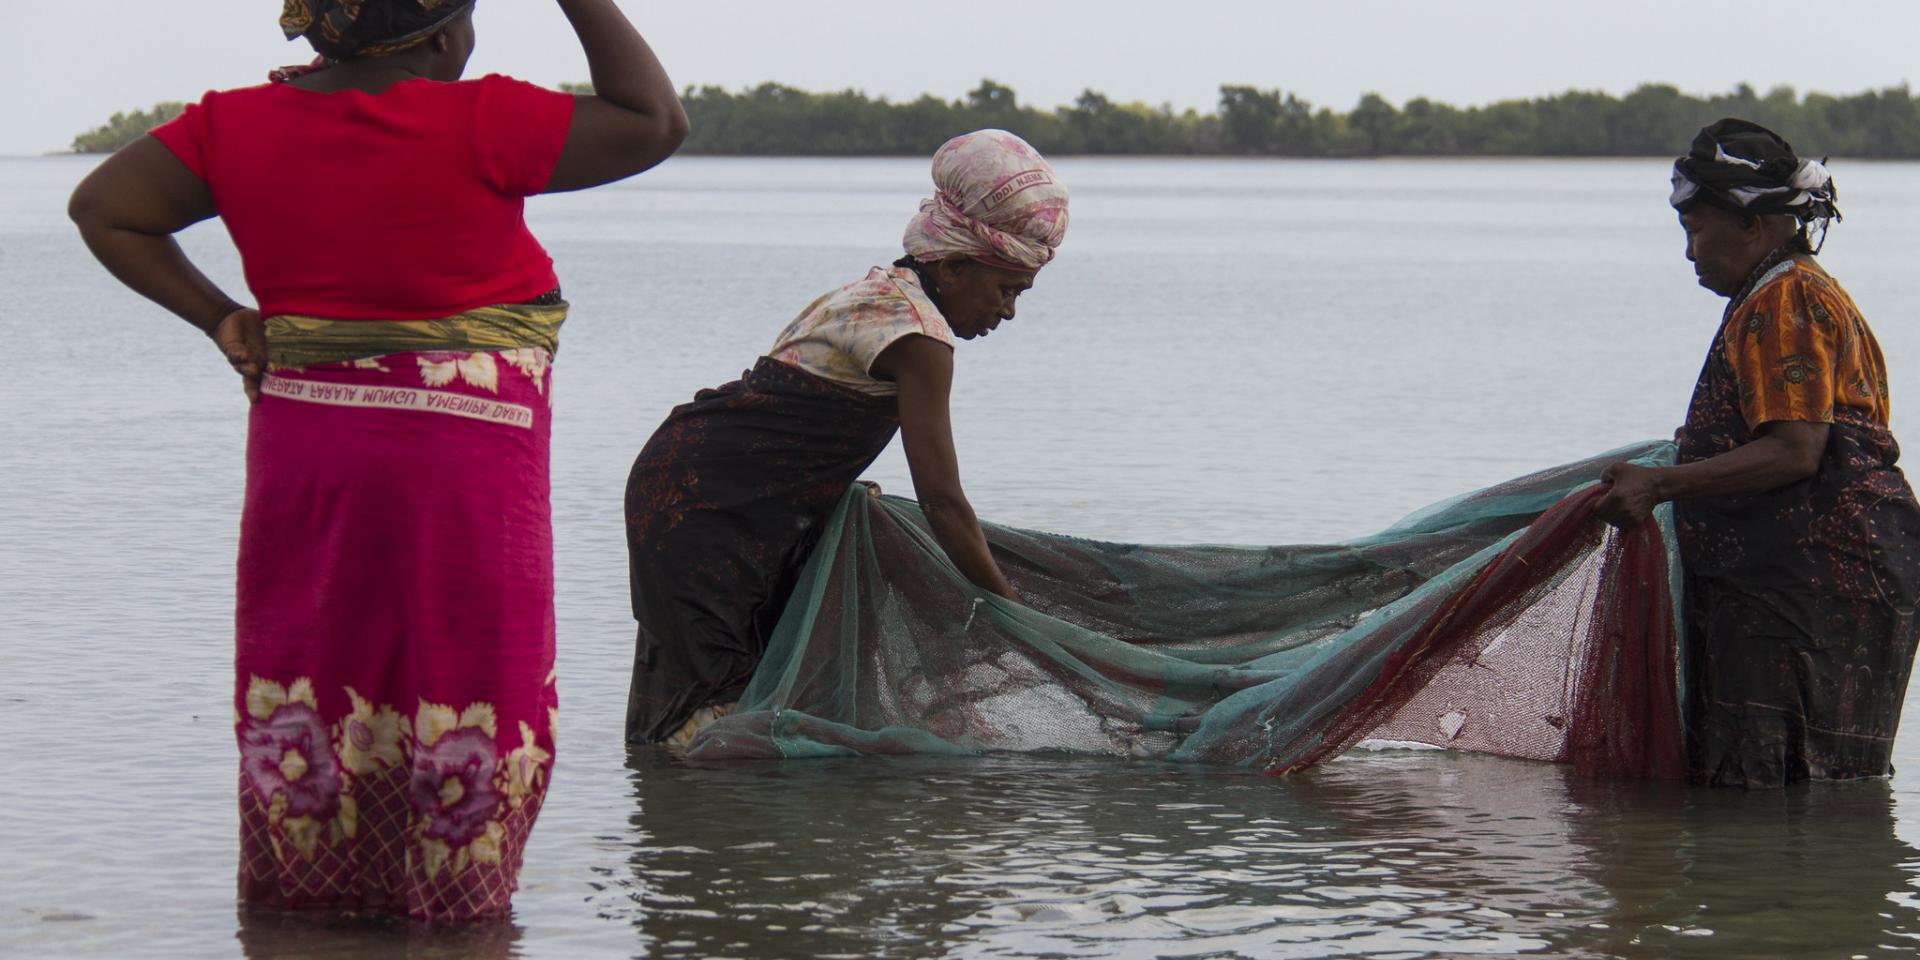 Working as a team; fisher women catching small fish and shrimp in Bagamoyo, Tanzania.